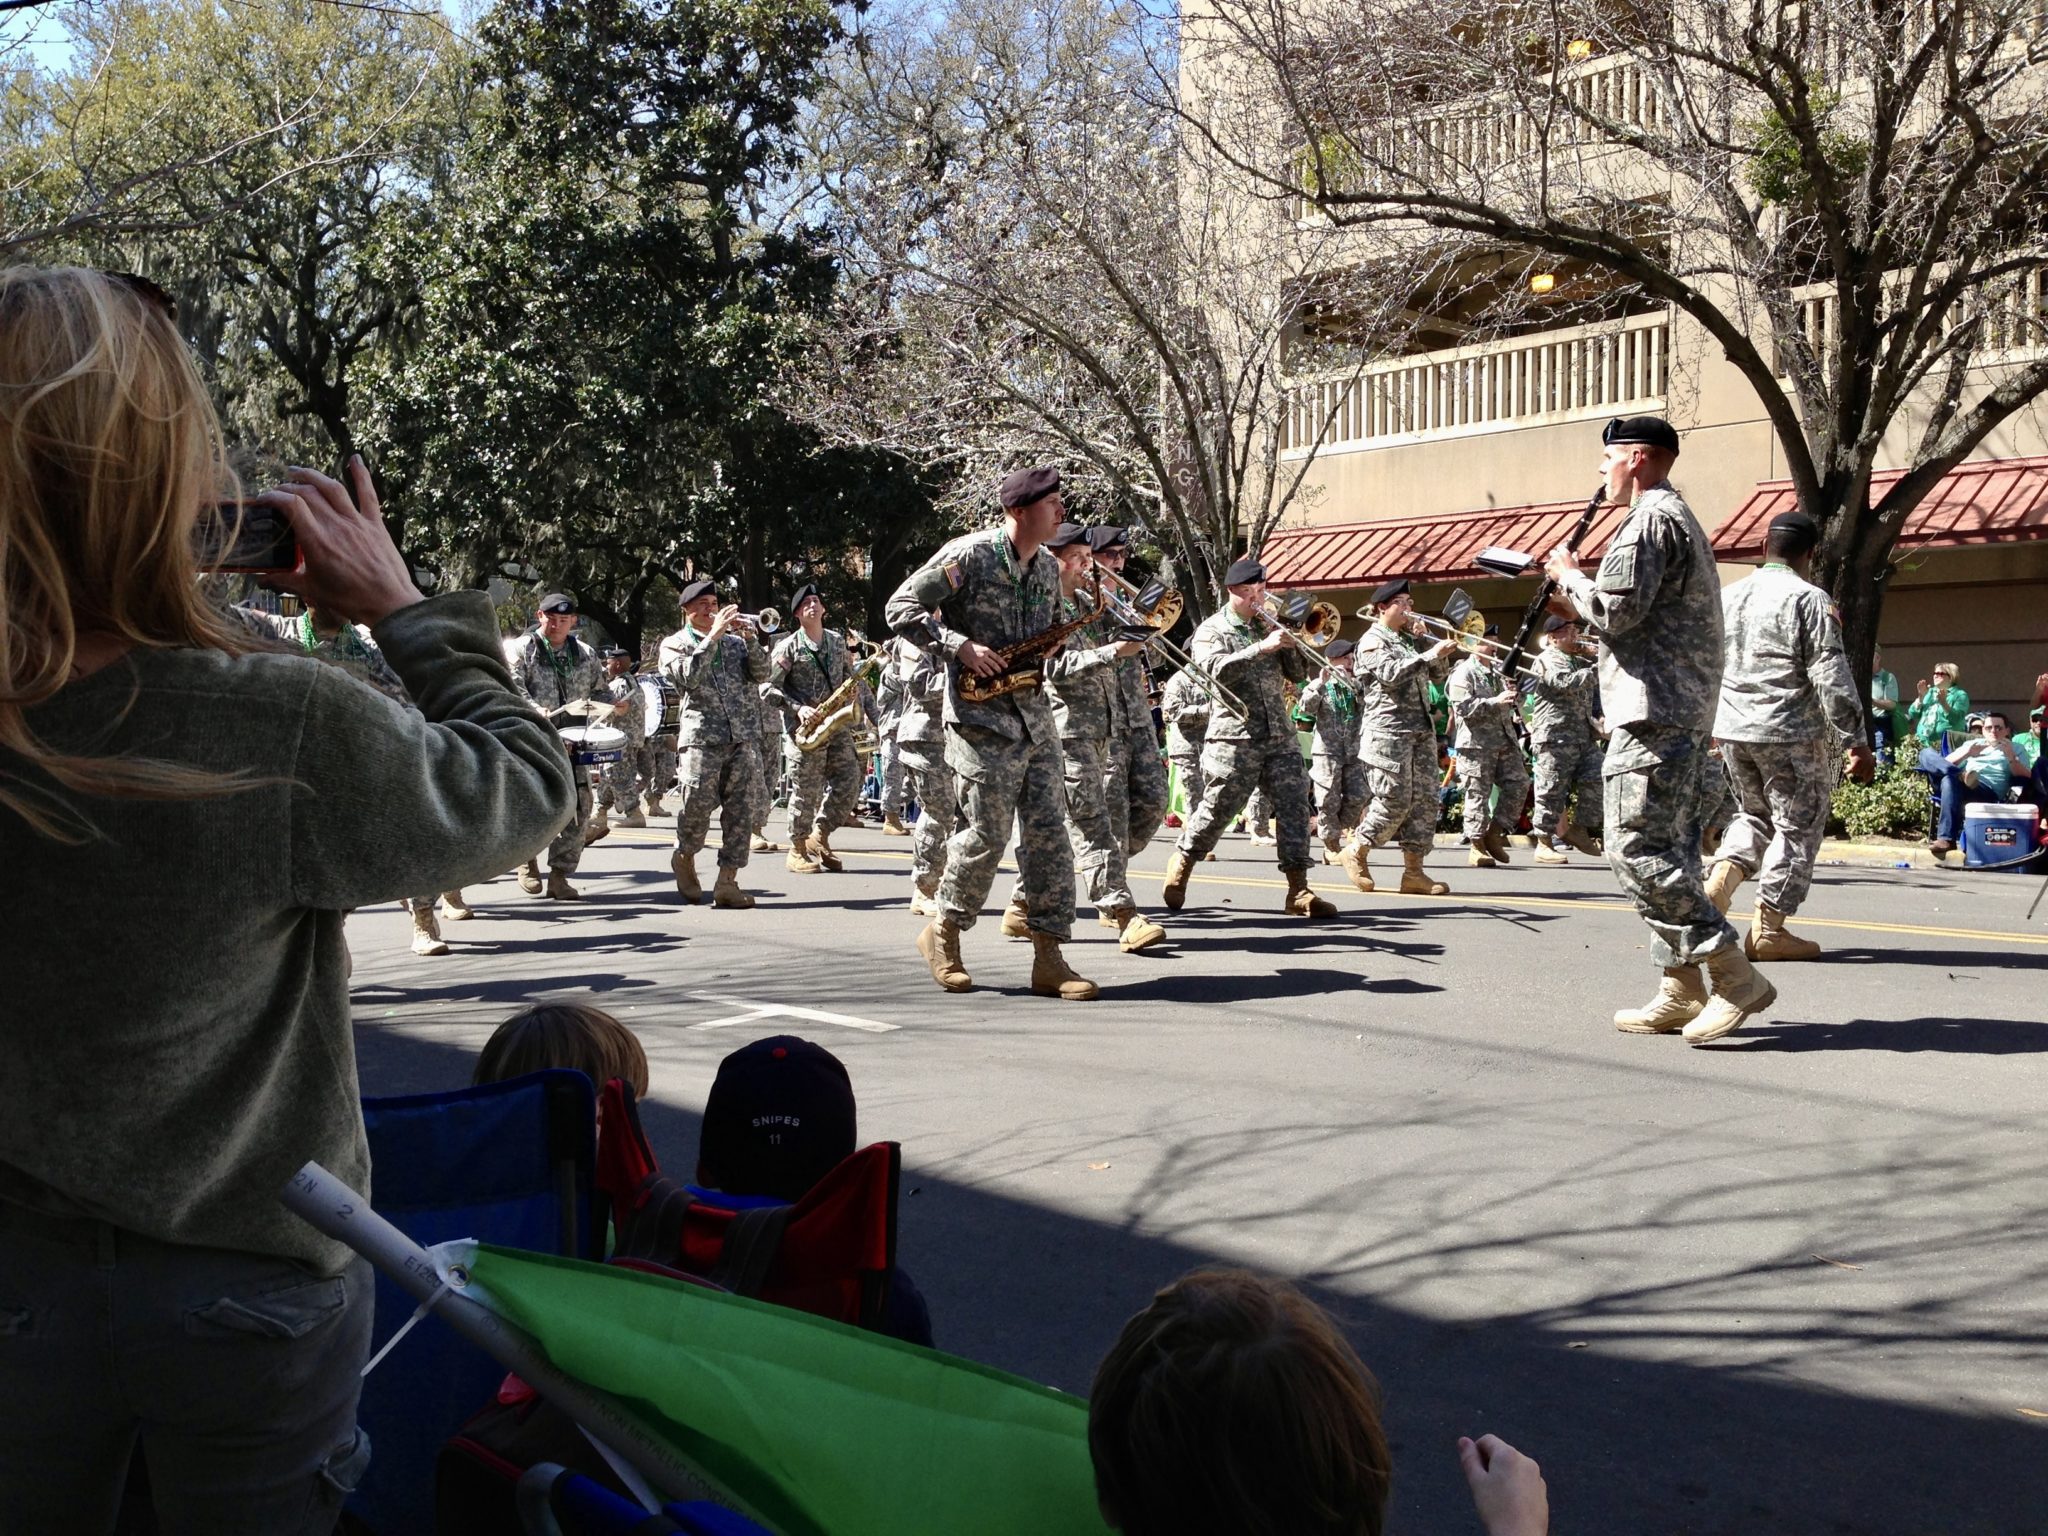 Soldiers Marching in Parade Savannah